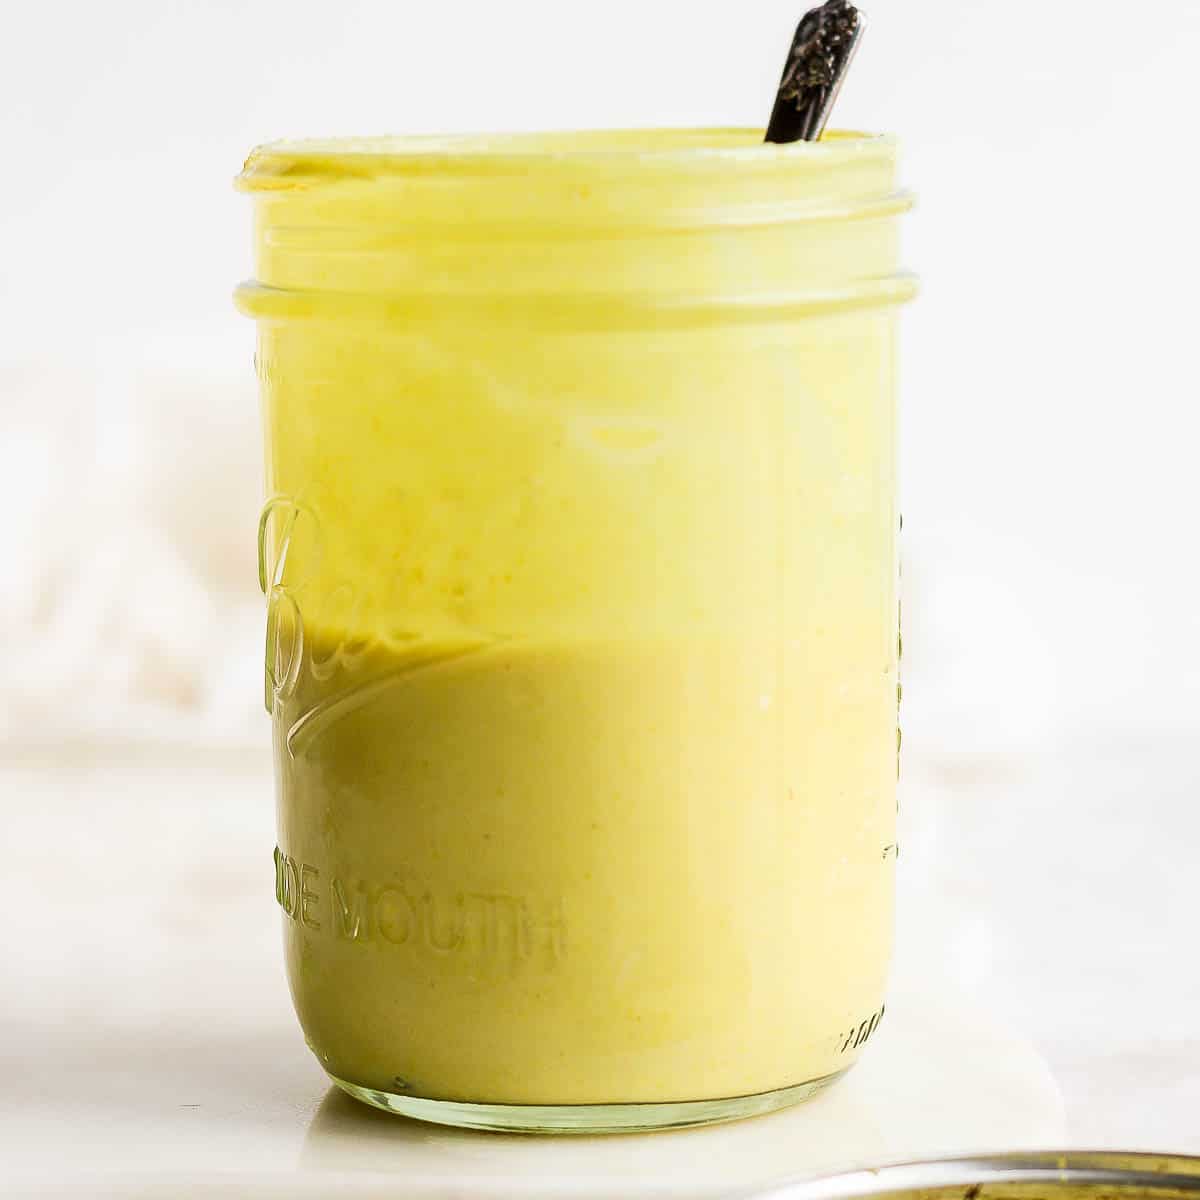 Mason jar of honey mustard dressing with spoon sticking out.